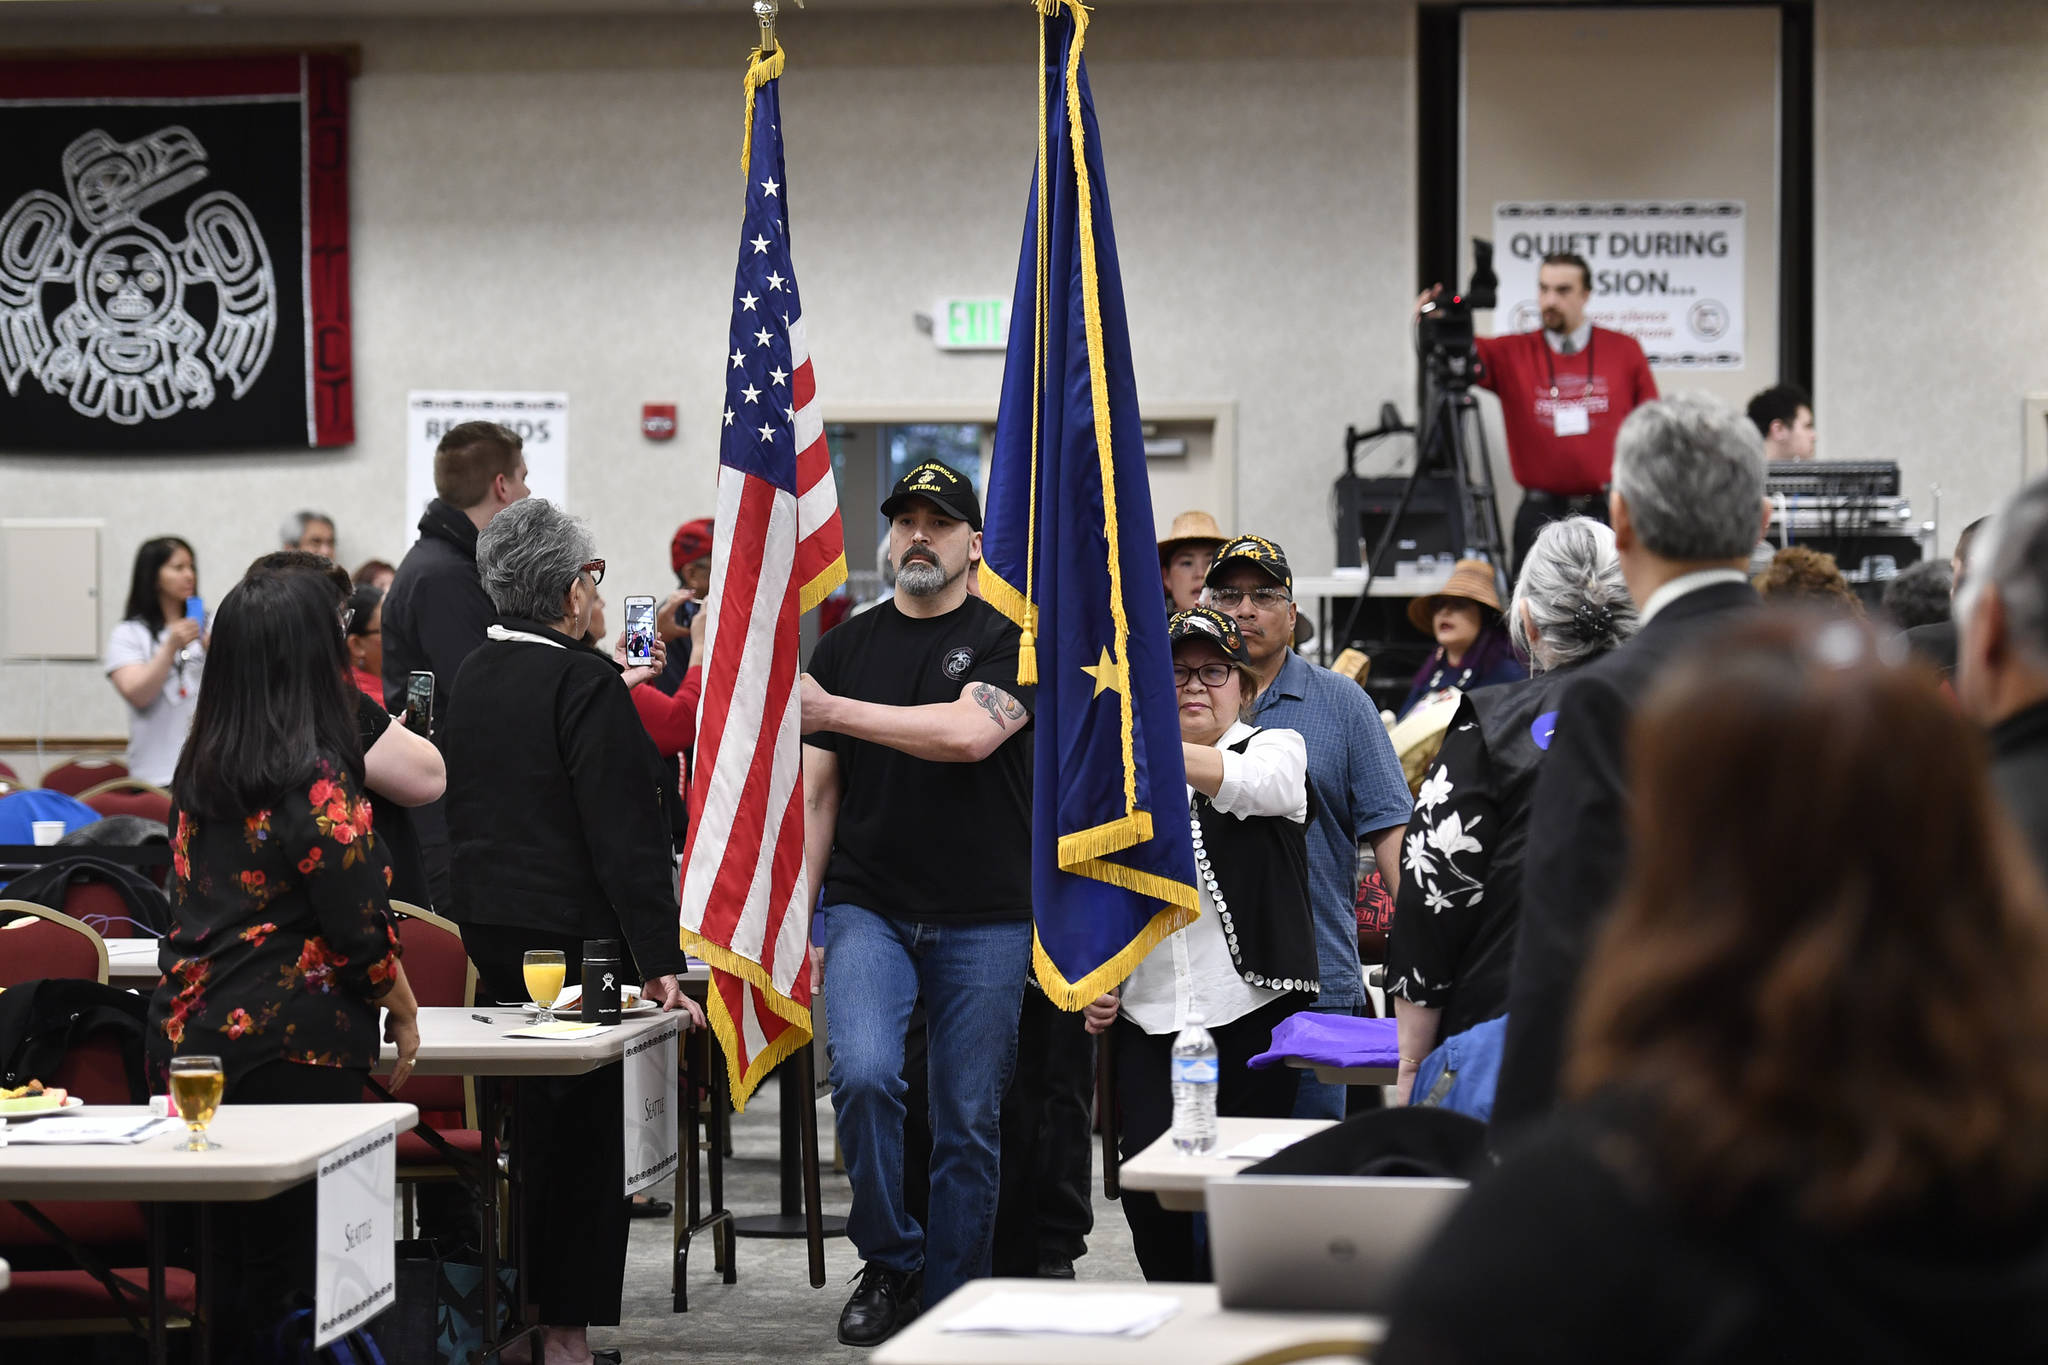 Southeast Alaska Native Veterans bring the colors during the opening of the three day 84th annual Tribal Assembly of the Central Council of Tlingit and Haida Indian Tribes of Alaska at the Elizabeth Peratrovich Hall on Wednesday, April 10, 2019. (Michael Penn | Juneau Empire)